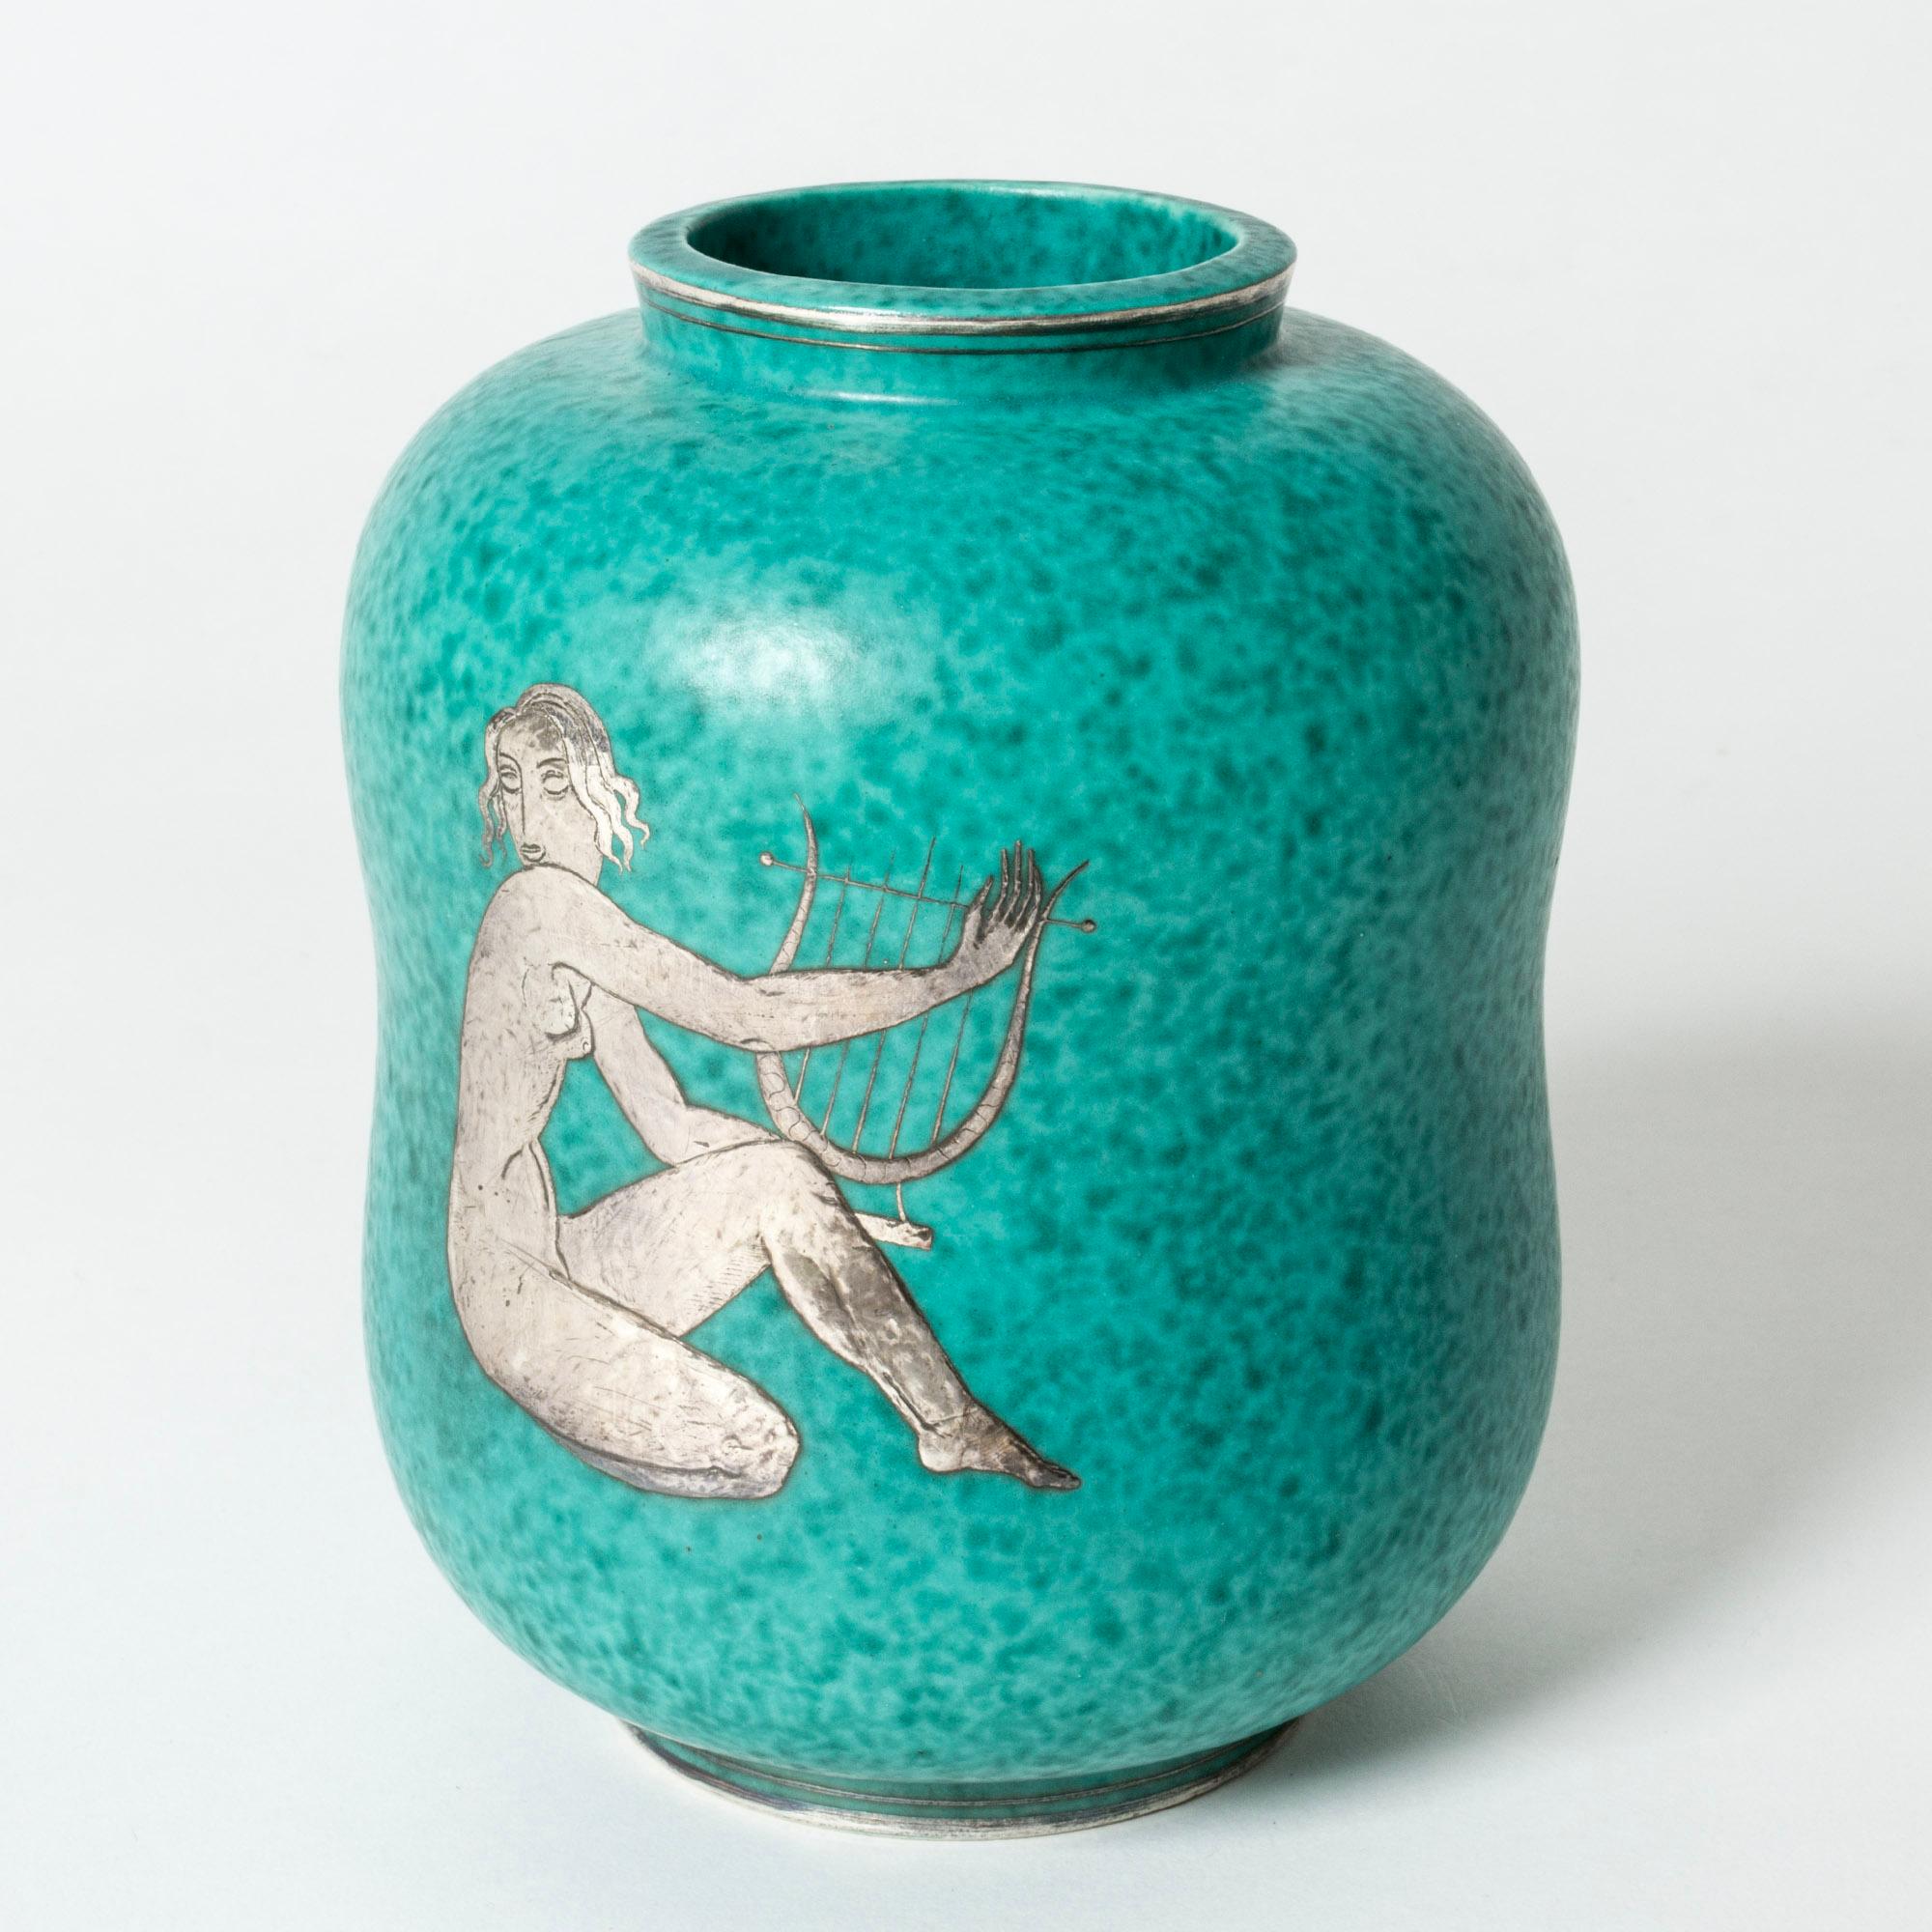 Lovely stoneware “Argenta” vase by Wilhelm Kåge in a curvesome form. Decorated with a motif of a woman playing a harp. Lovely attention to detail.

“Argenta” was introduced at the Stockholm exhibition in 1930 and became Wilhelm Kåge’s most widely